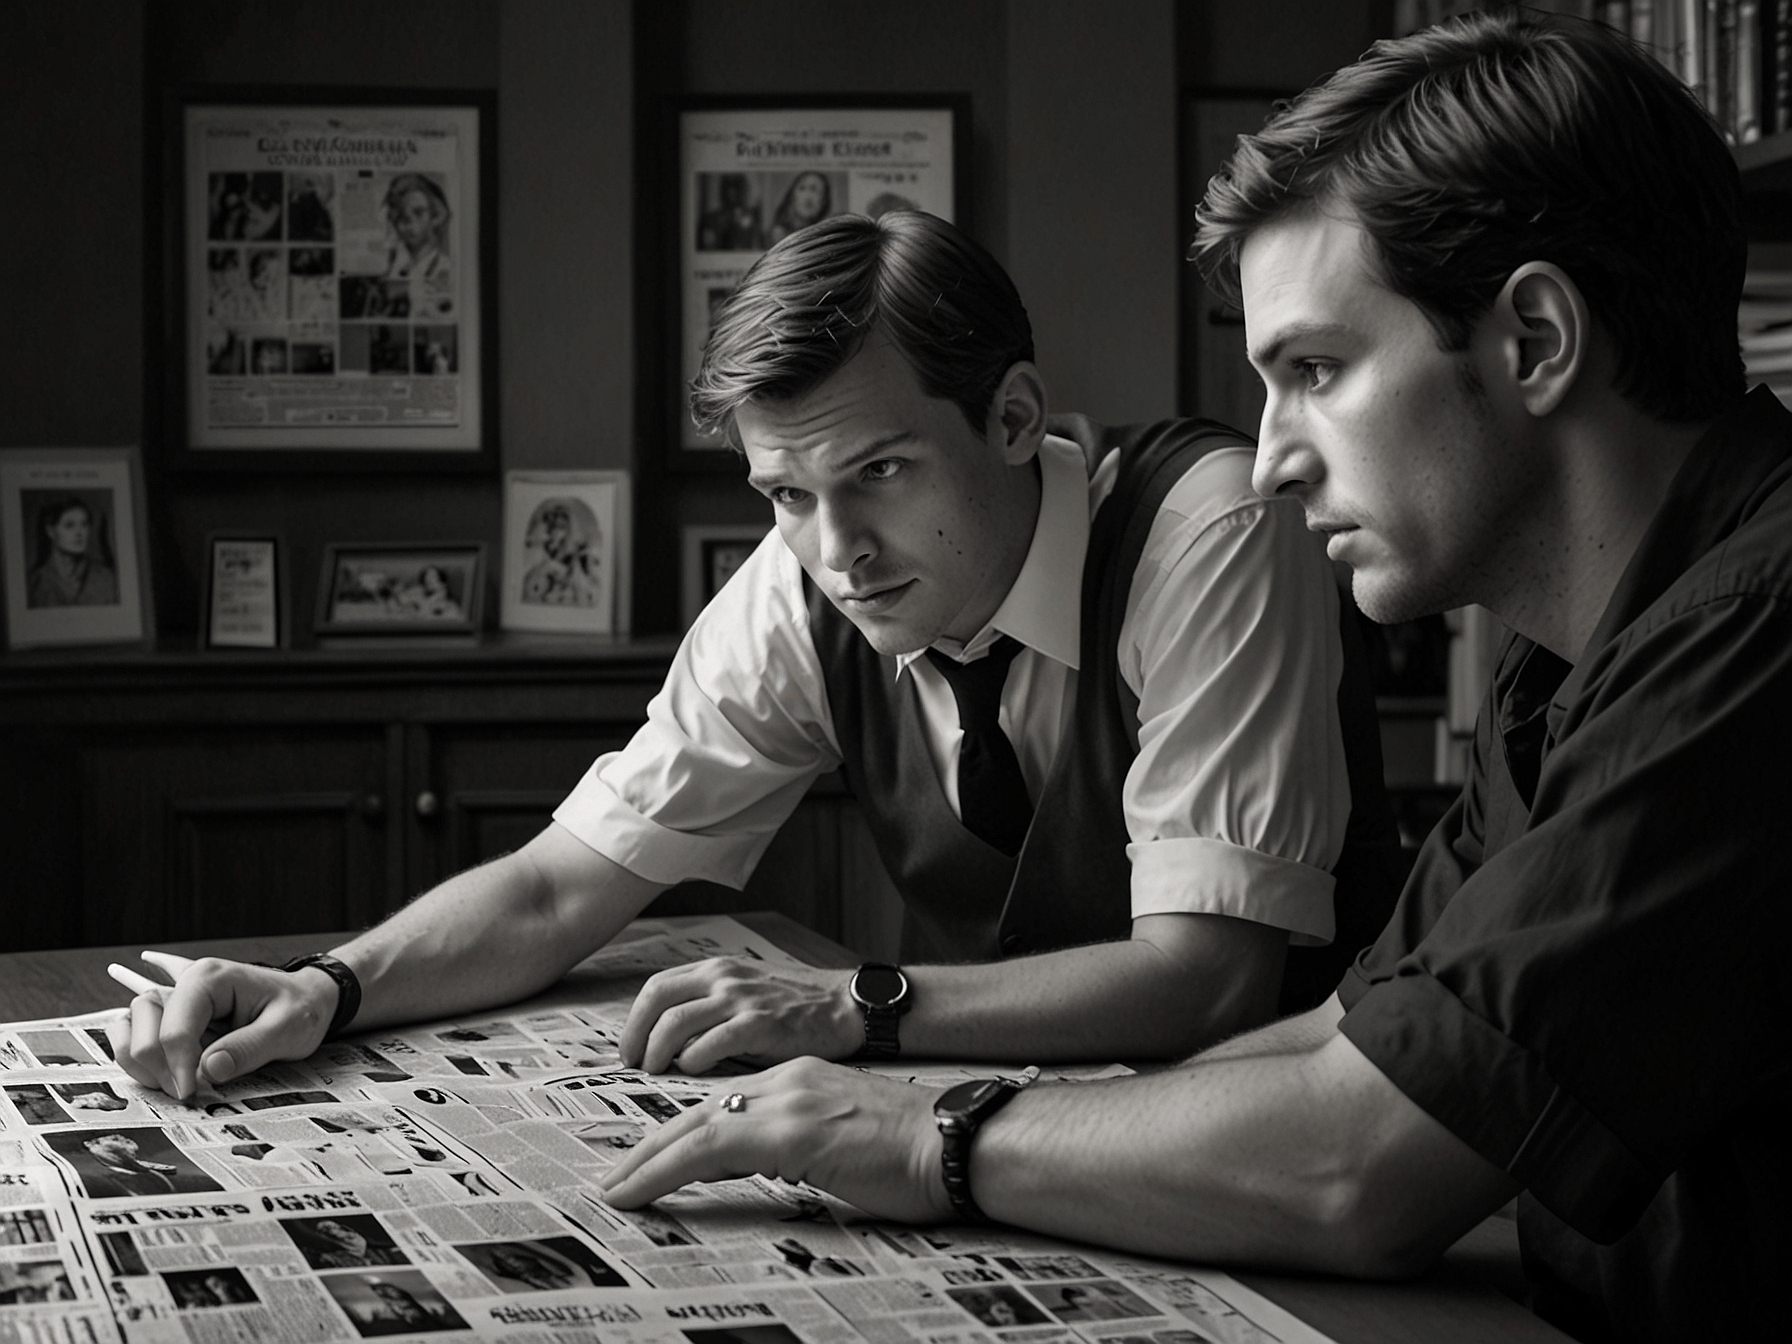 Players examining a newspaper spread featuring the NYT Connections puzzle, with focused expressions reflecting their engagement in solving game #372.